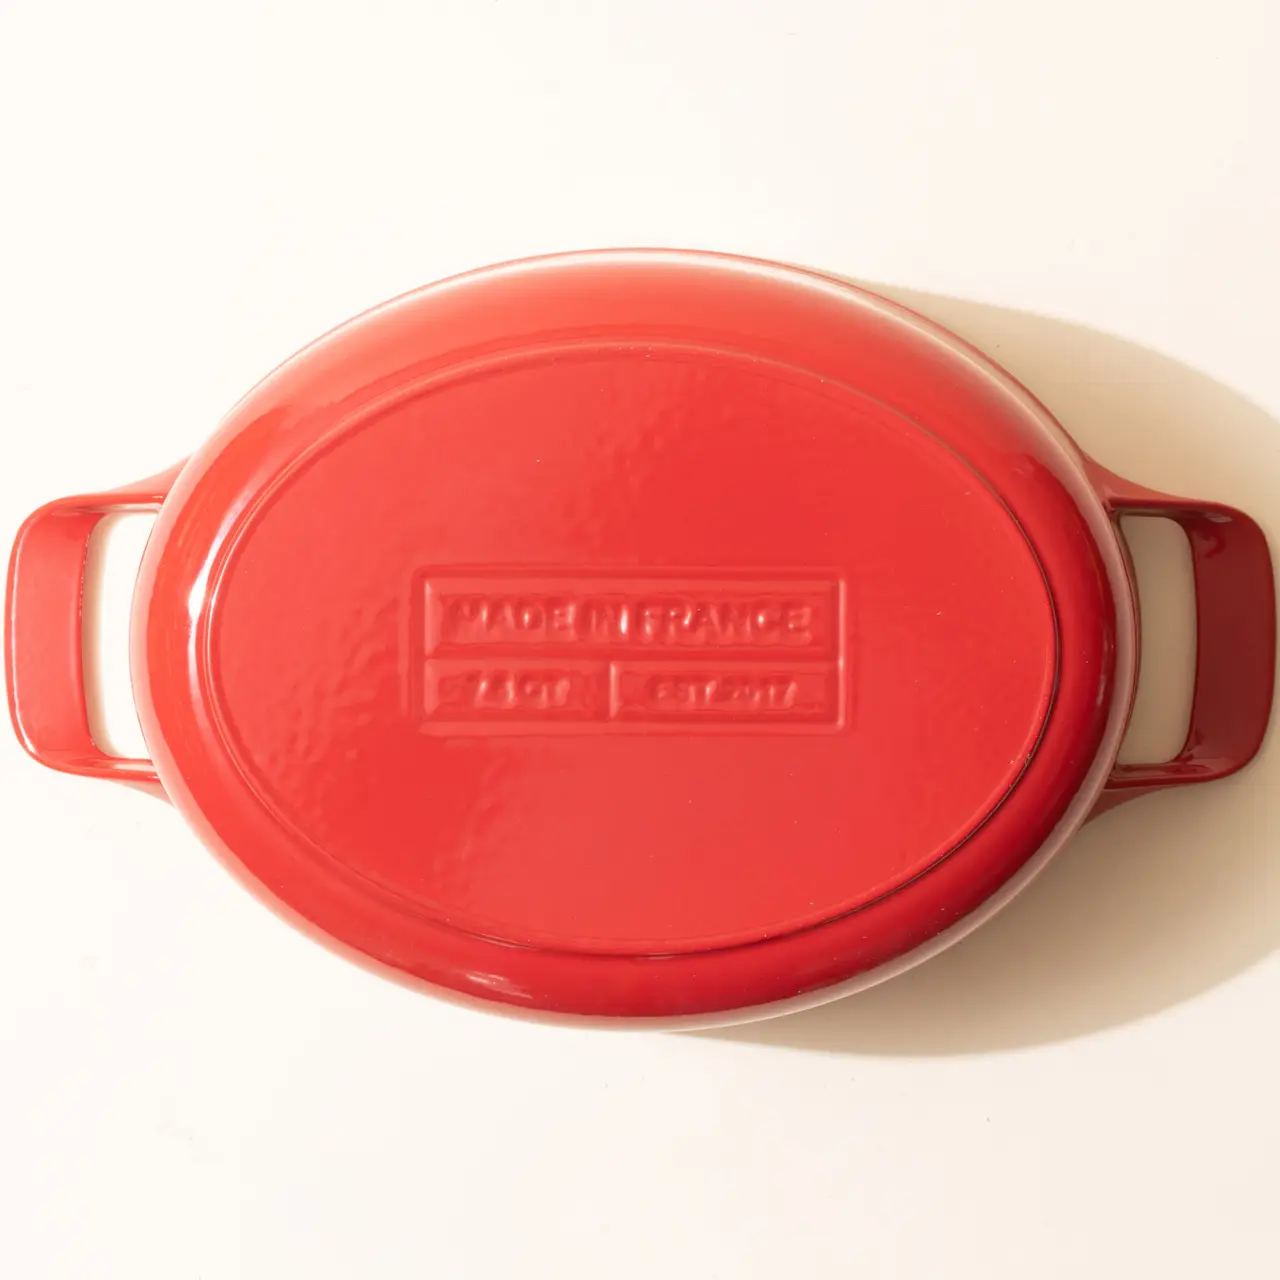 A red oval casserole dish with side handles and a lid, displaying "MADE IN FRANCE" embossed text.